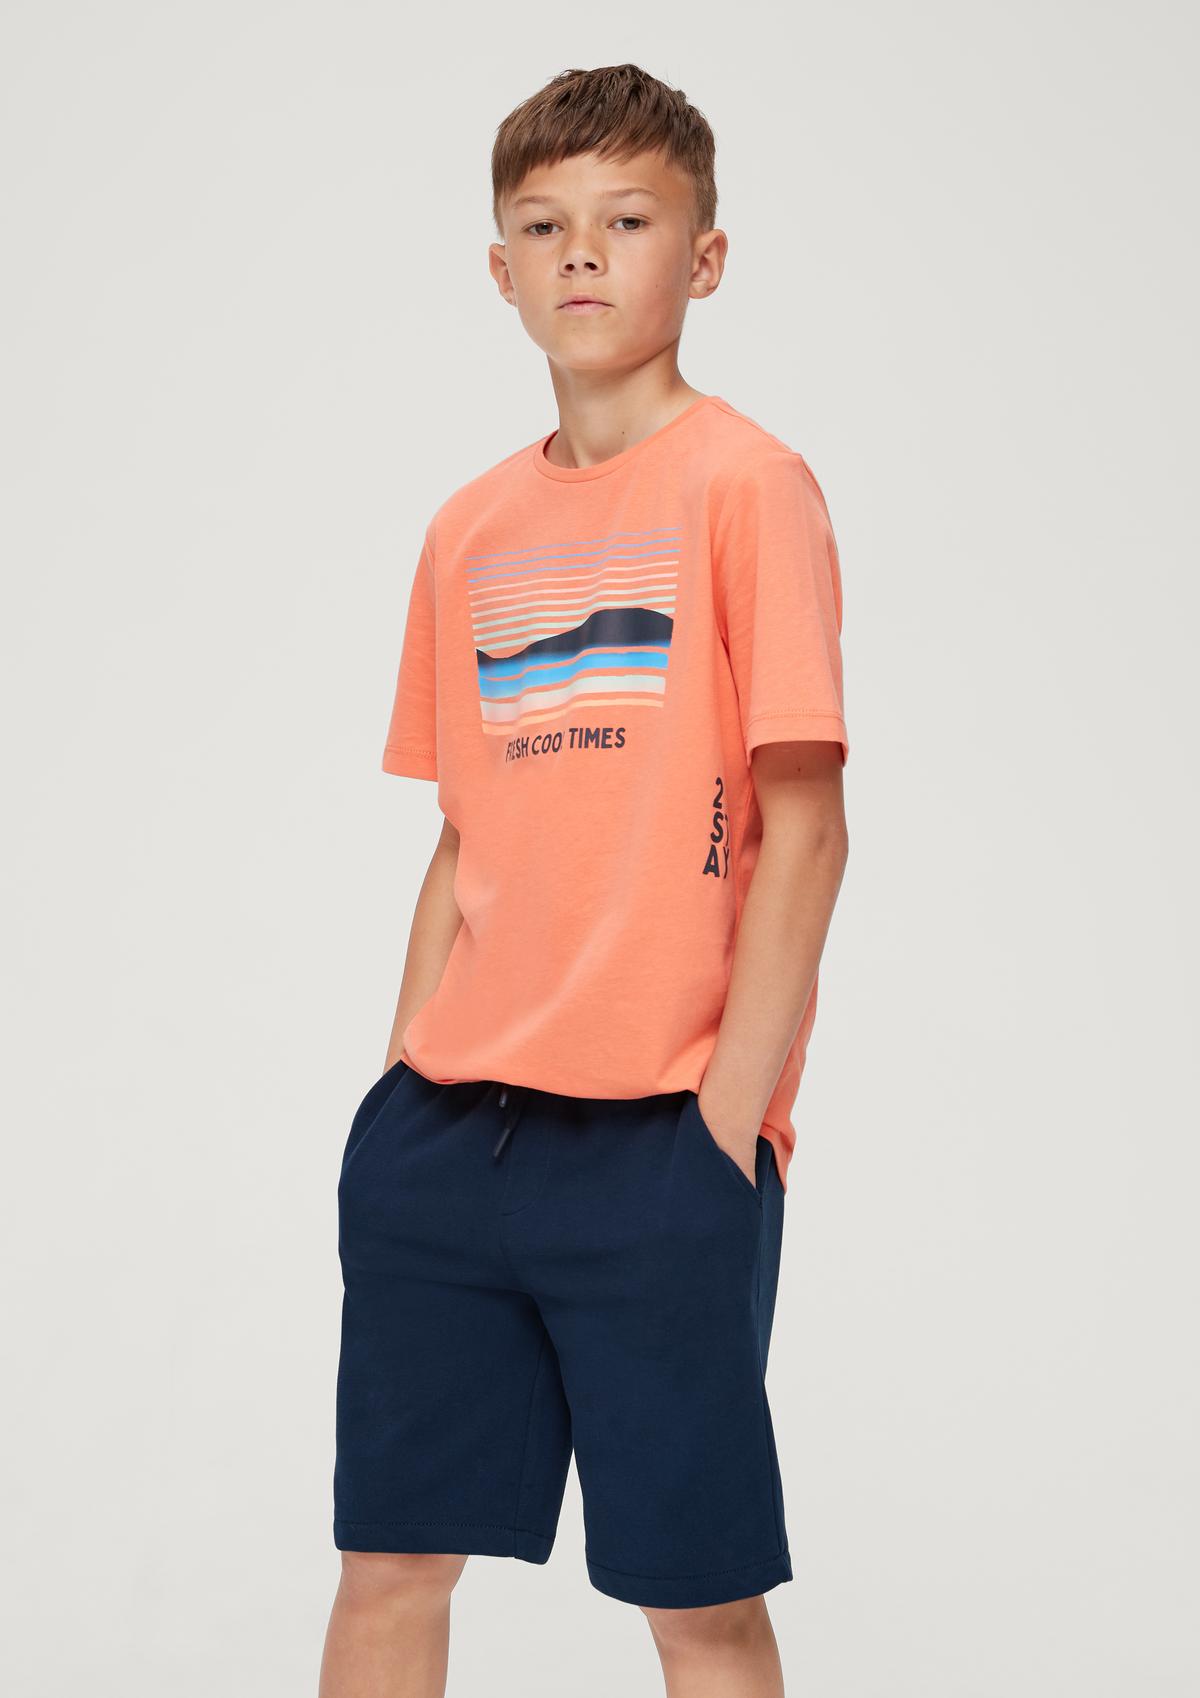 boys shorts for Find and Bermuda online teens